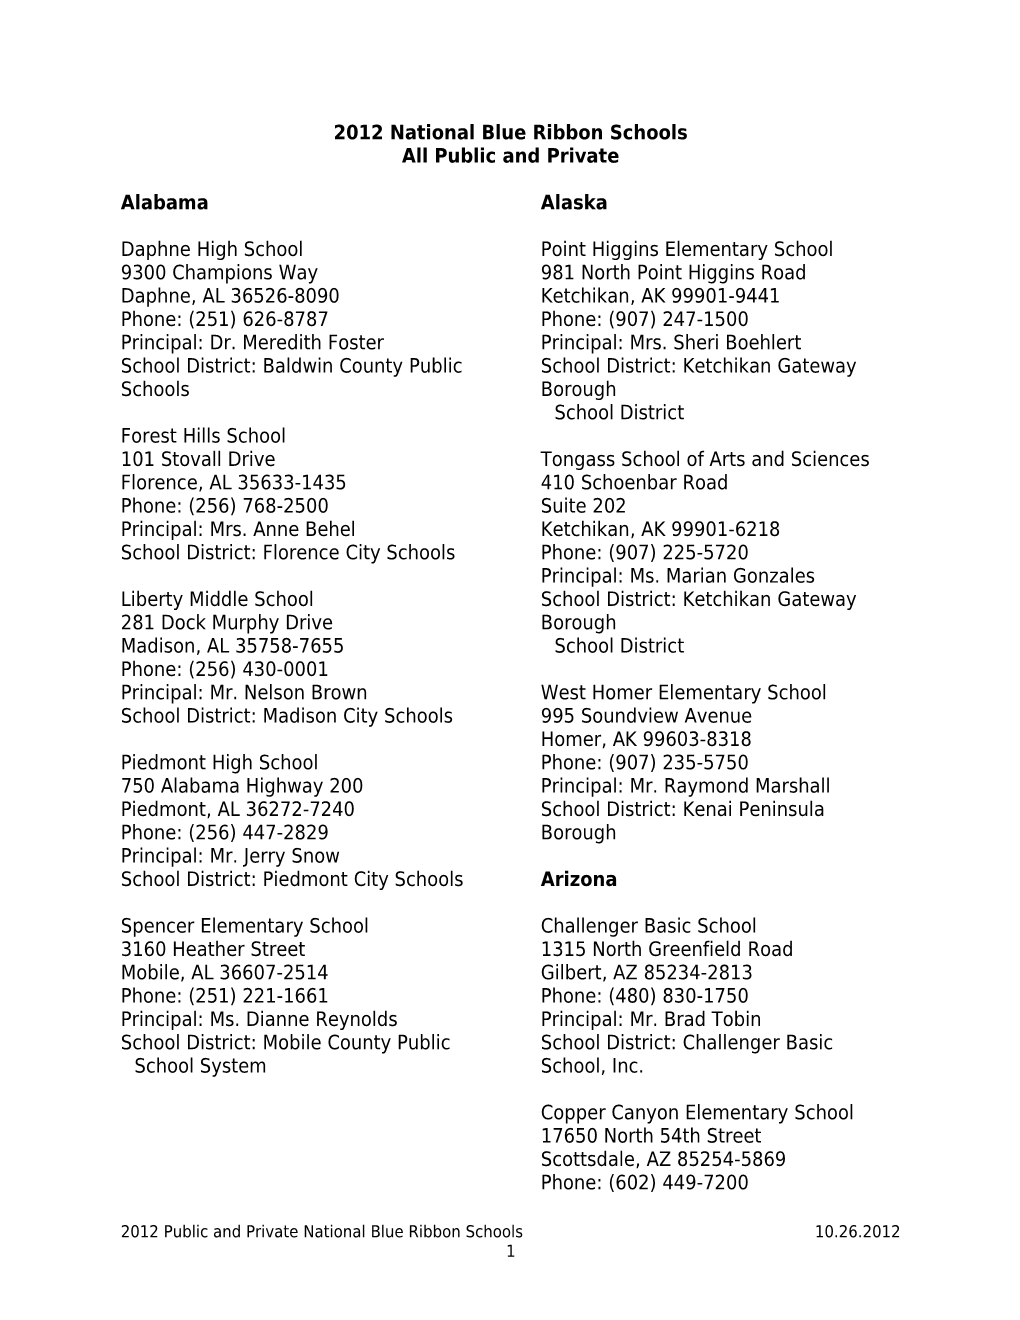 All Public and Private Schools: 2012 National Blue Ribbon Schools September 27, 2012 (MS Word)